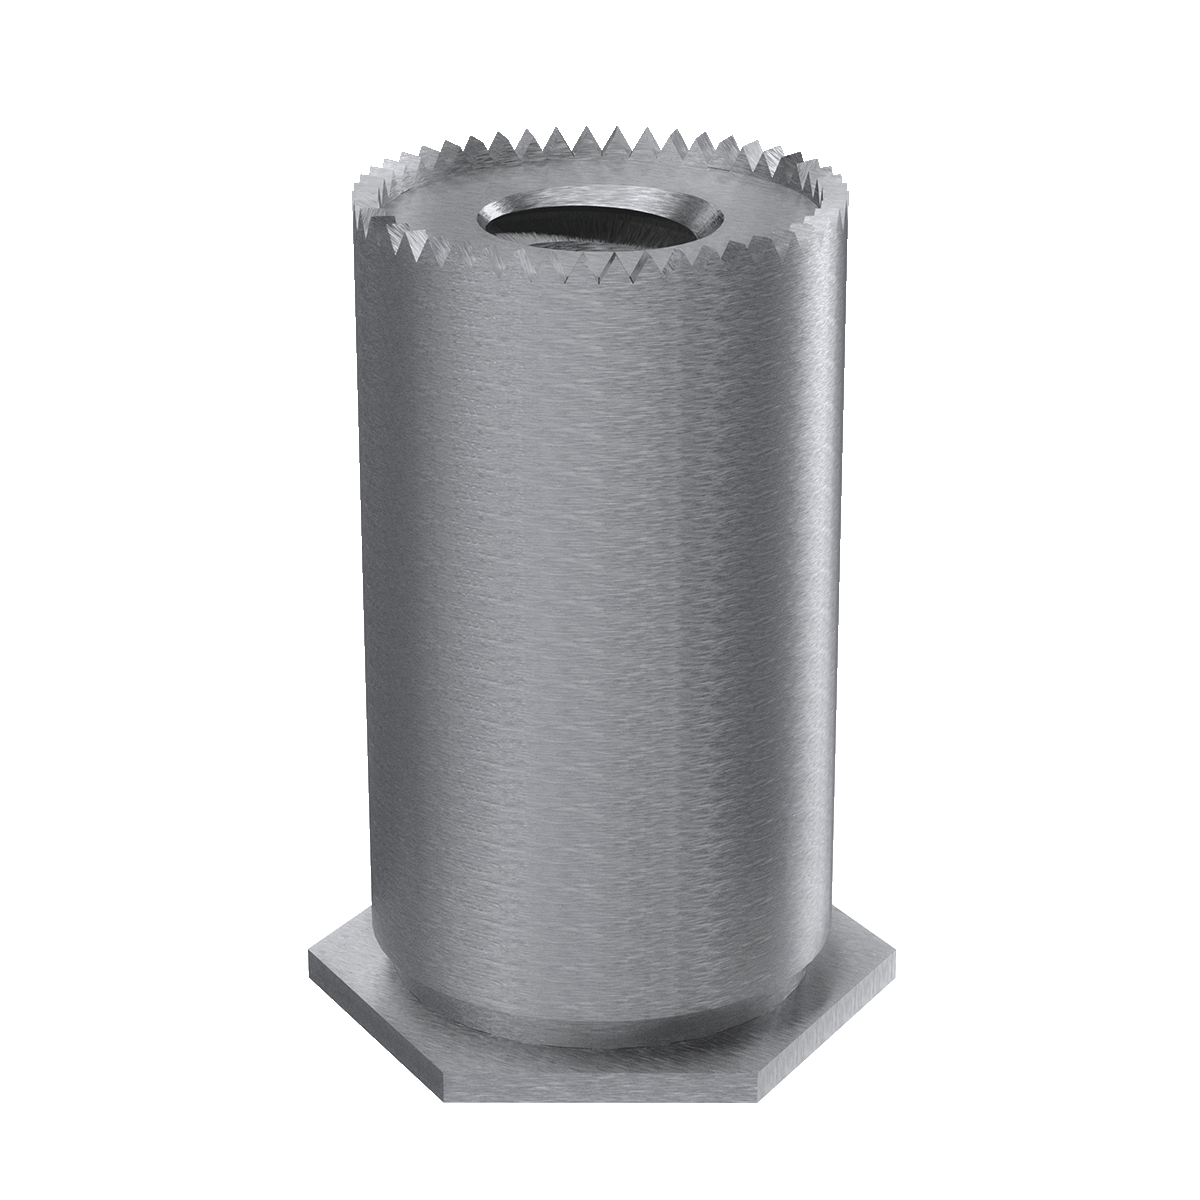 Self-Clinching Standoff, Self-Grounding, 300 Series Stainless Steel, Passivated, 4-40 x 0.437, 100 Pack